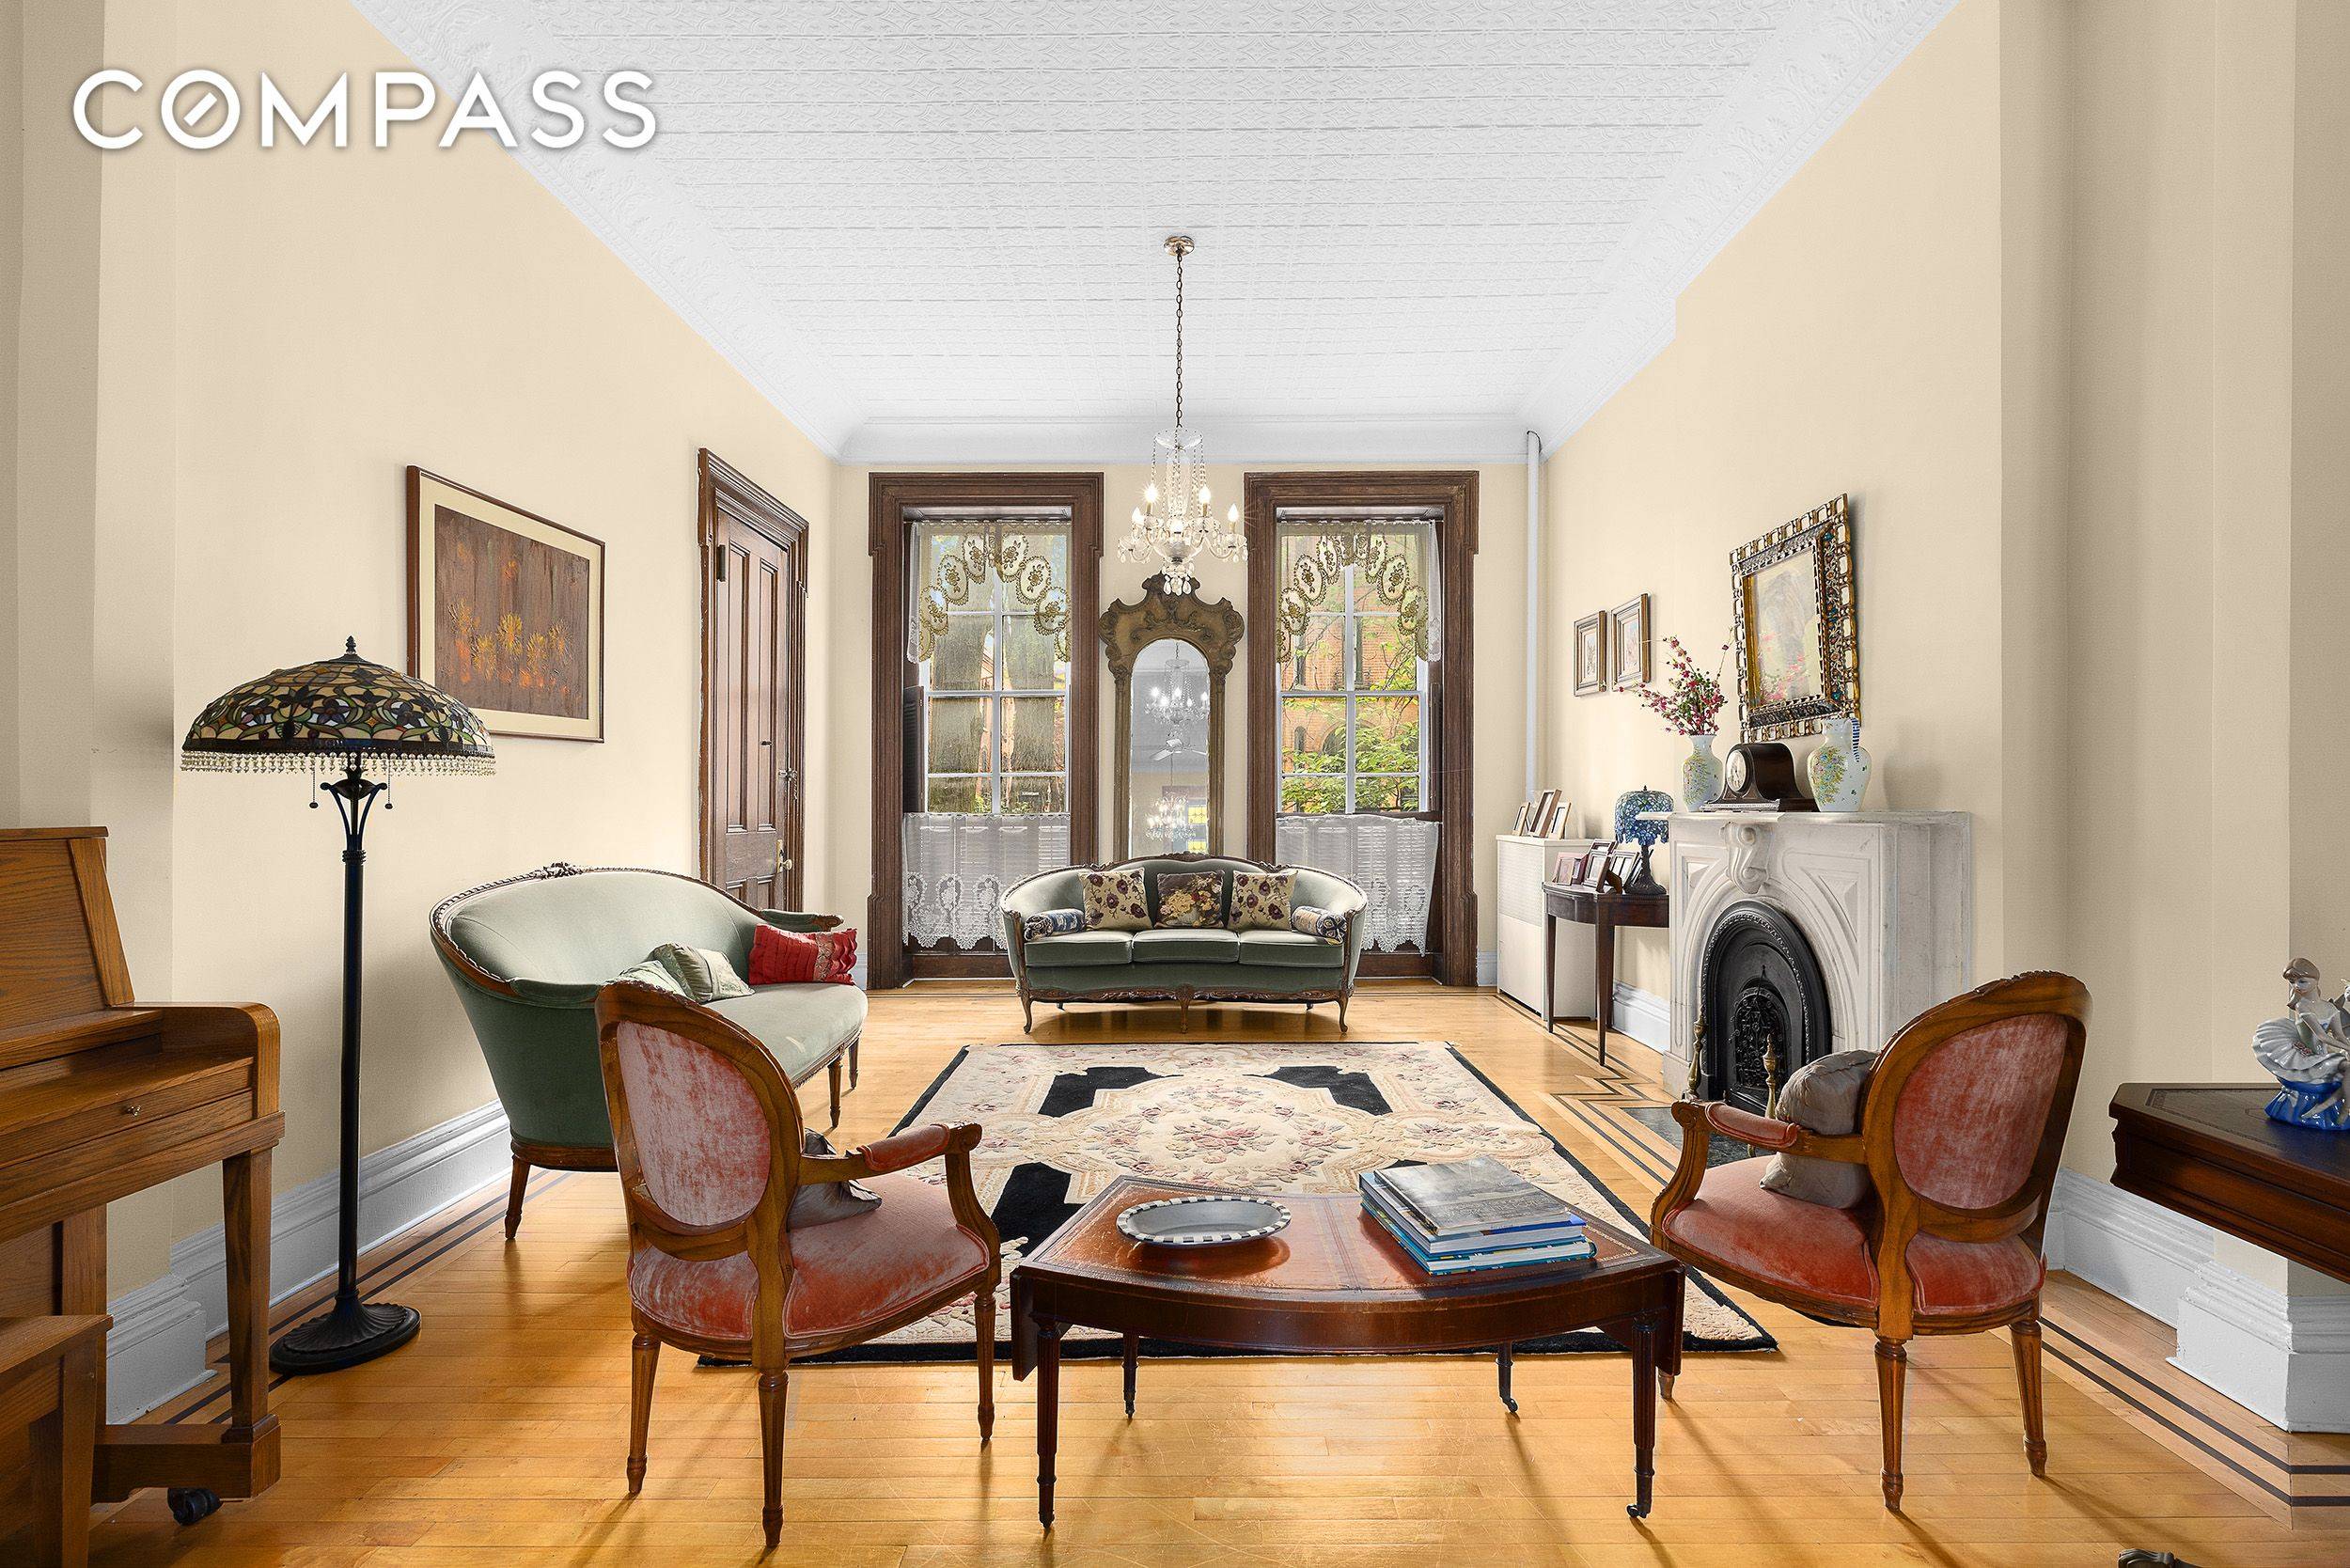 Welcome to 144 Baltic Street, a rare 25 wide classic brownstone in Cobble Hill situated directly across from the lush gardens of Warren Place Mews.